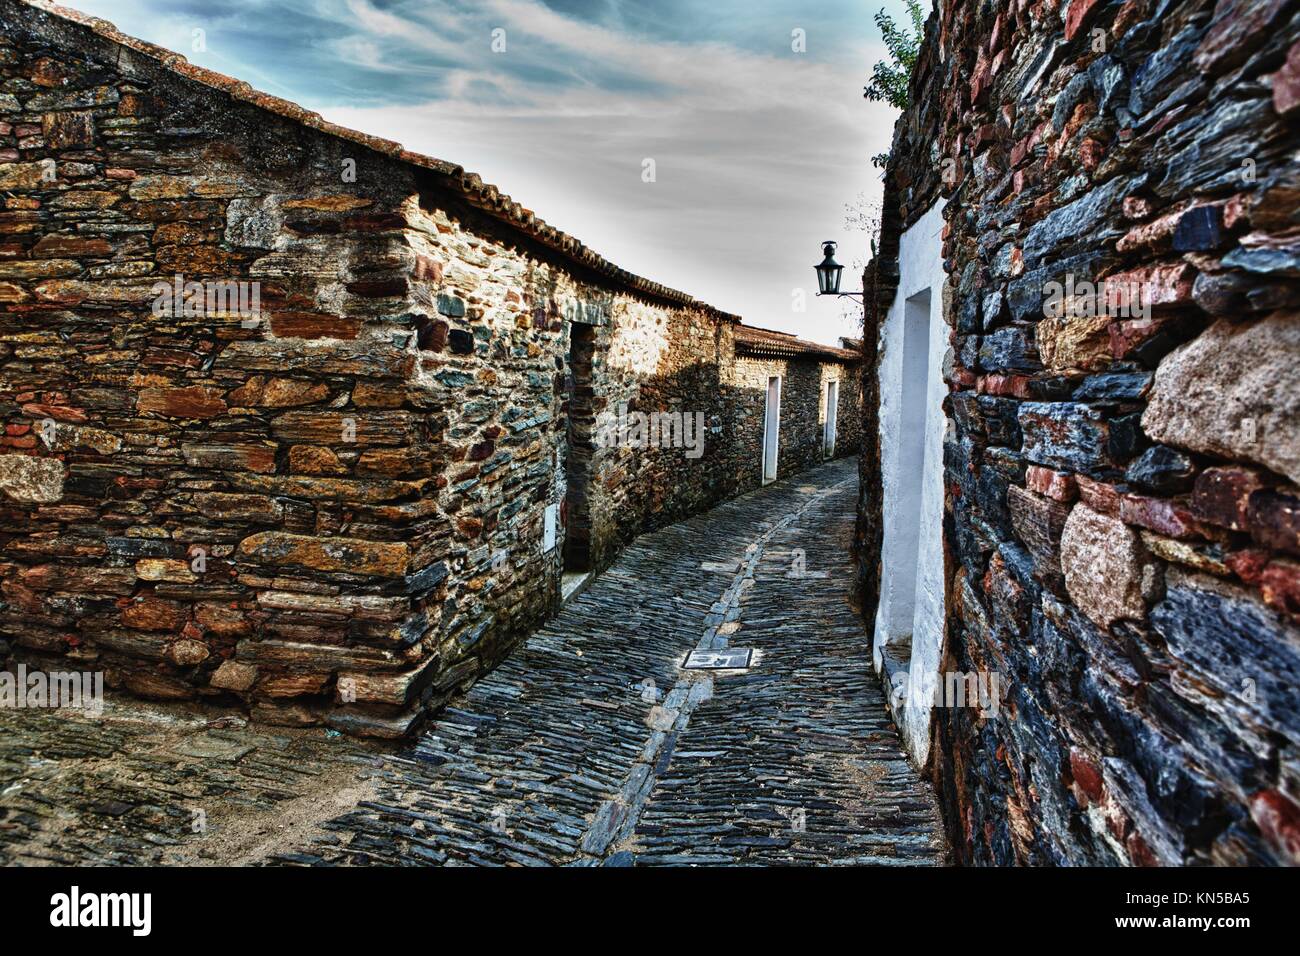 Magnificent village of Monsaraz; traditional street with small white houses and red tiles a typical view from the south of the country. Stock Photo